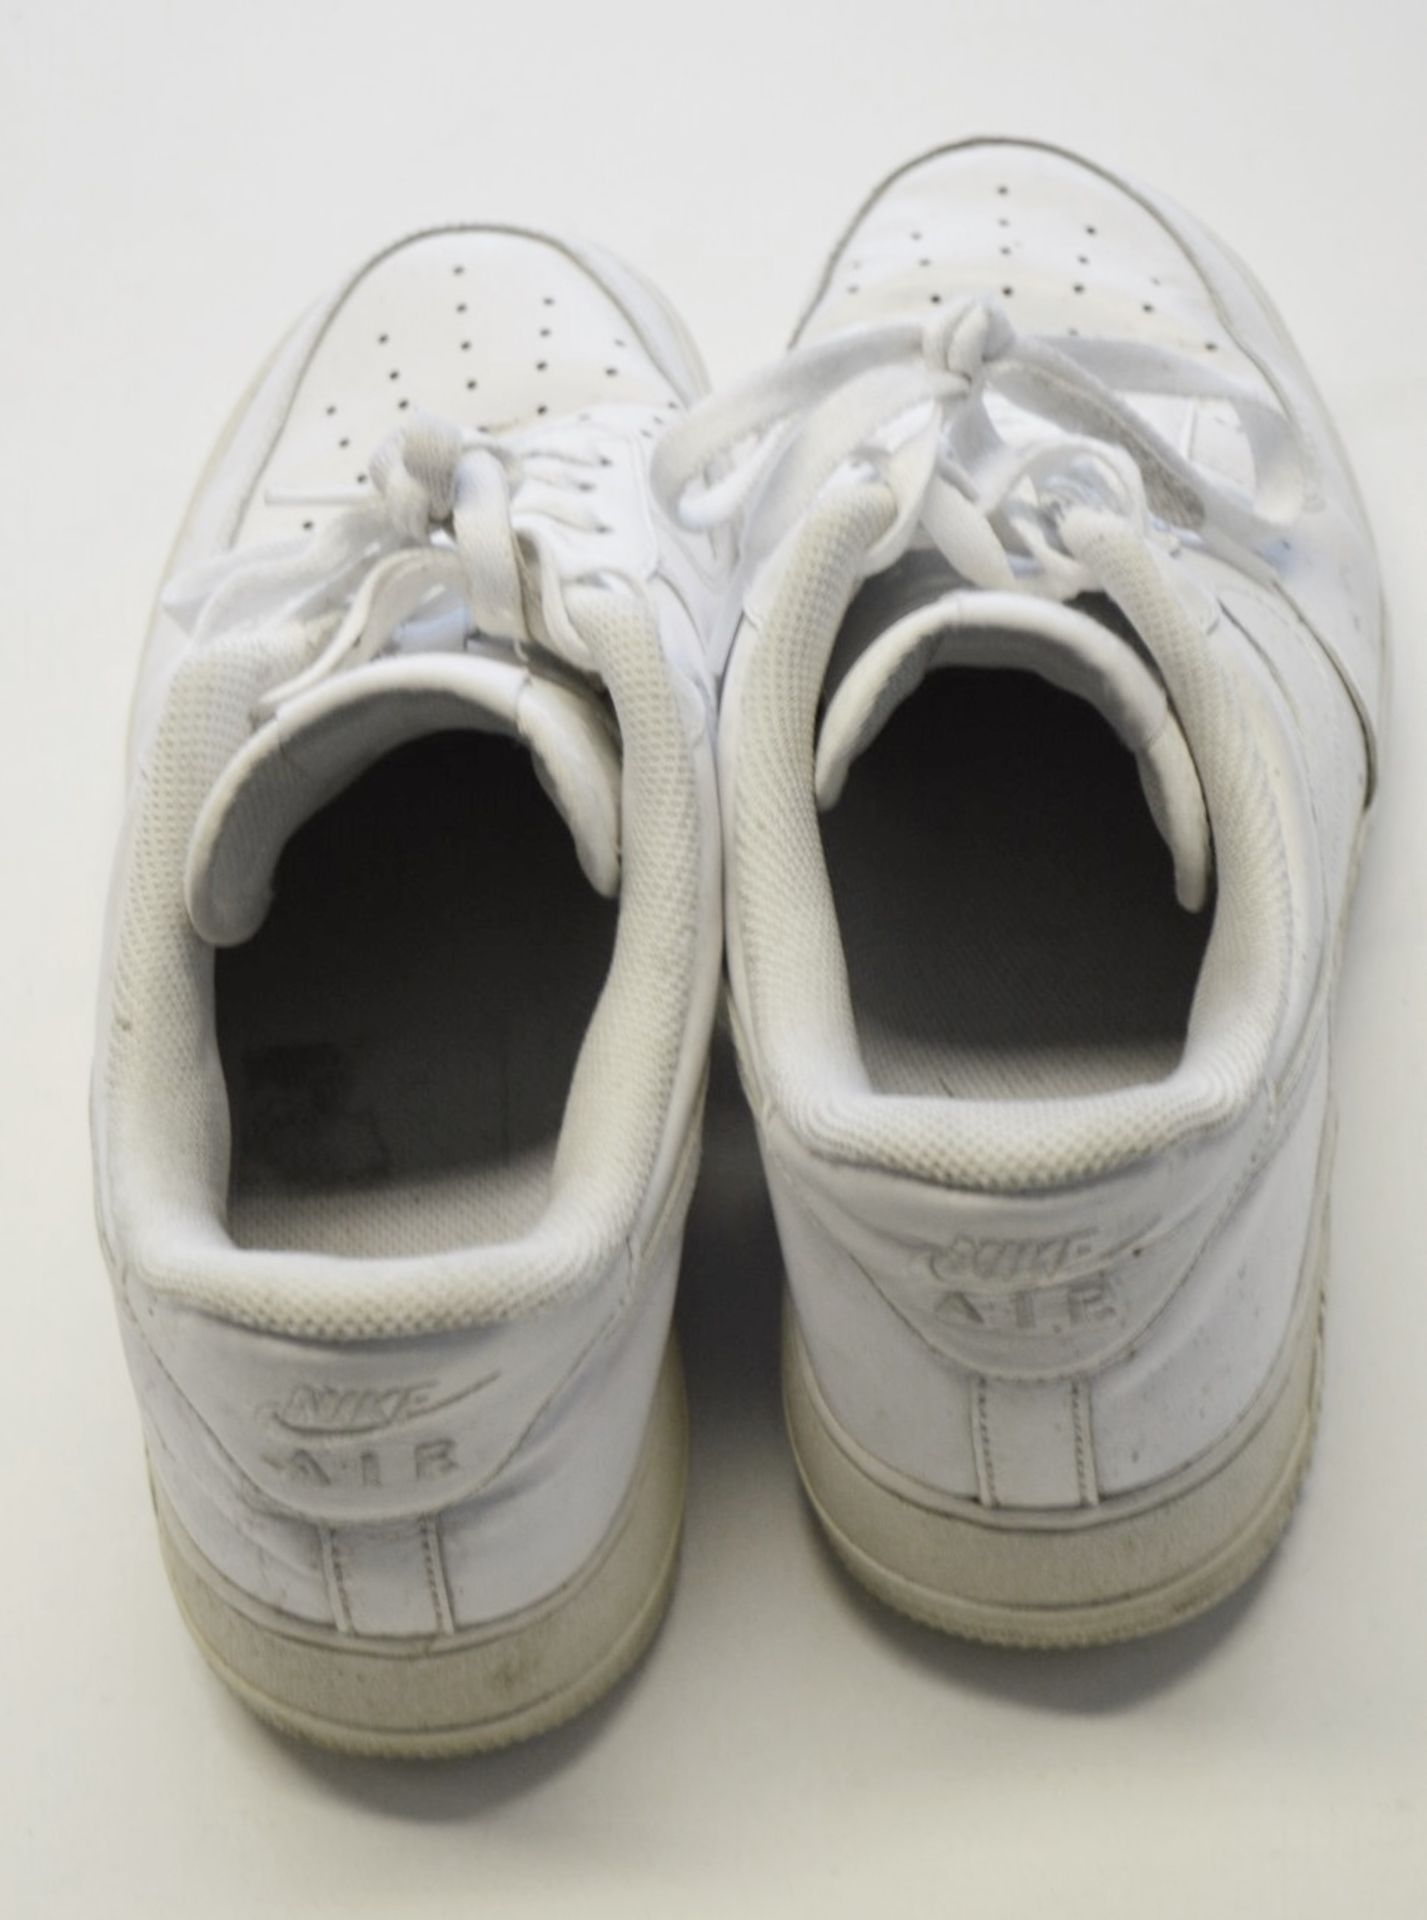 1 x Pair Of Men's Genuine Nike 'Air Force 1 Low' Trainers In White - Size (EU/UK): 44.5/9.5 - - Image 3 of 9